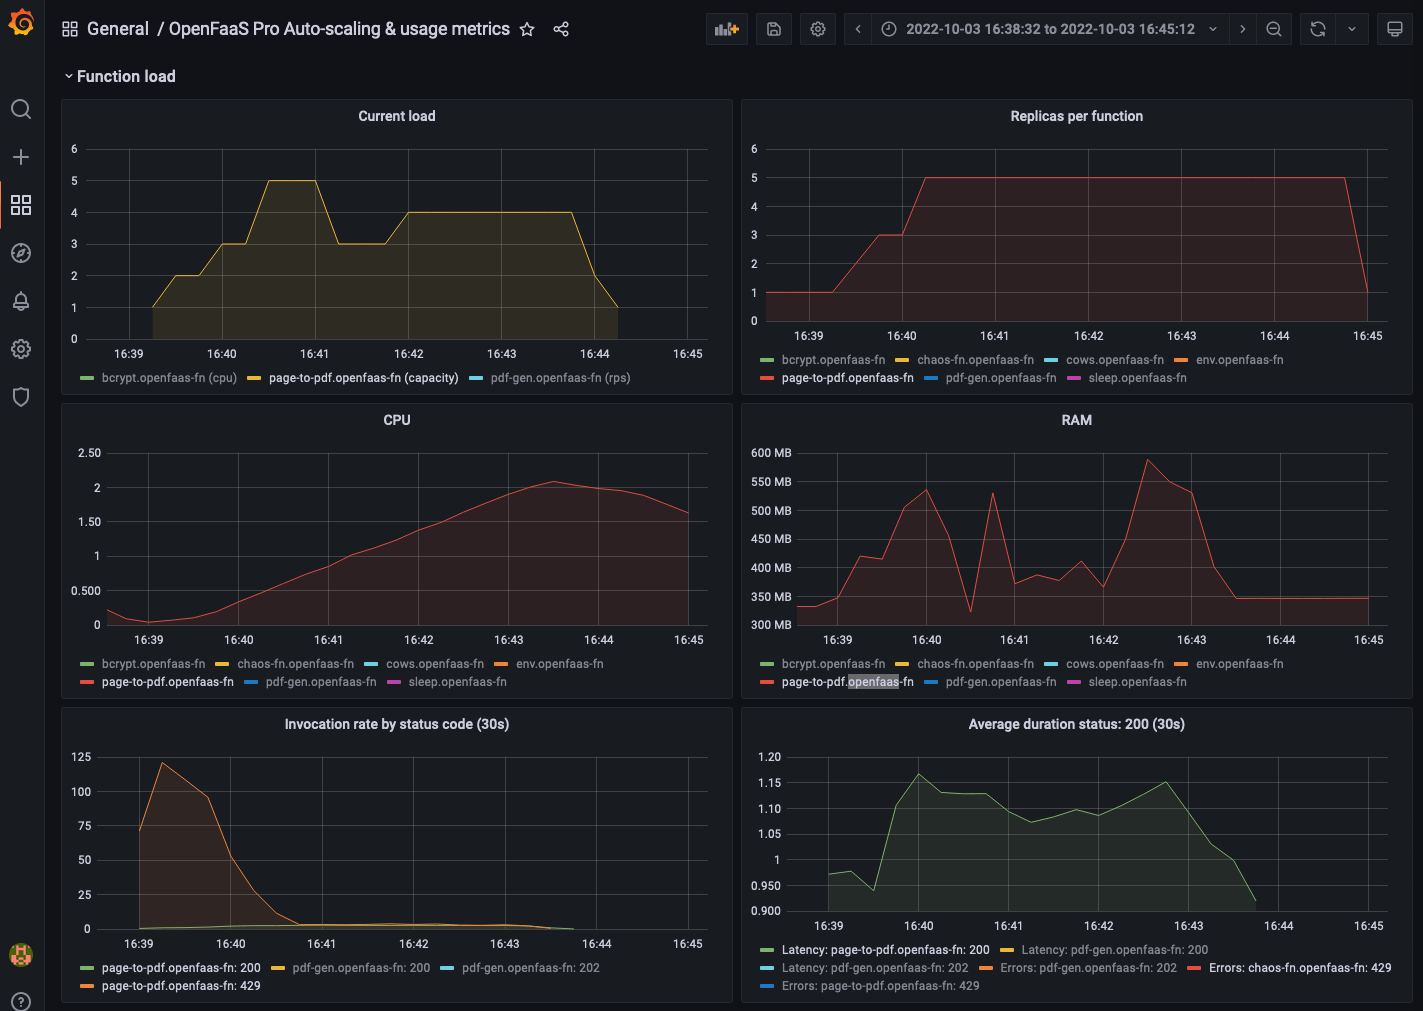 Grafana dashboard showing the replicas and invocation rate for the page-to-pdf >function.